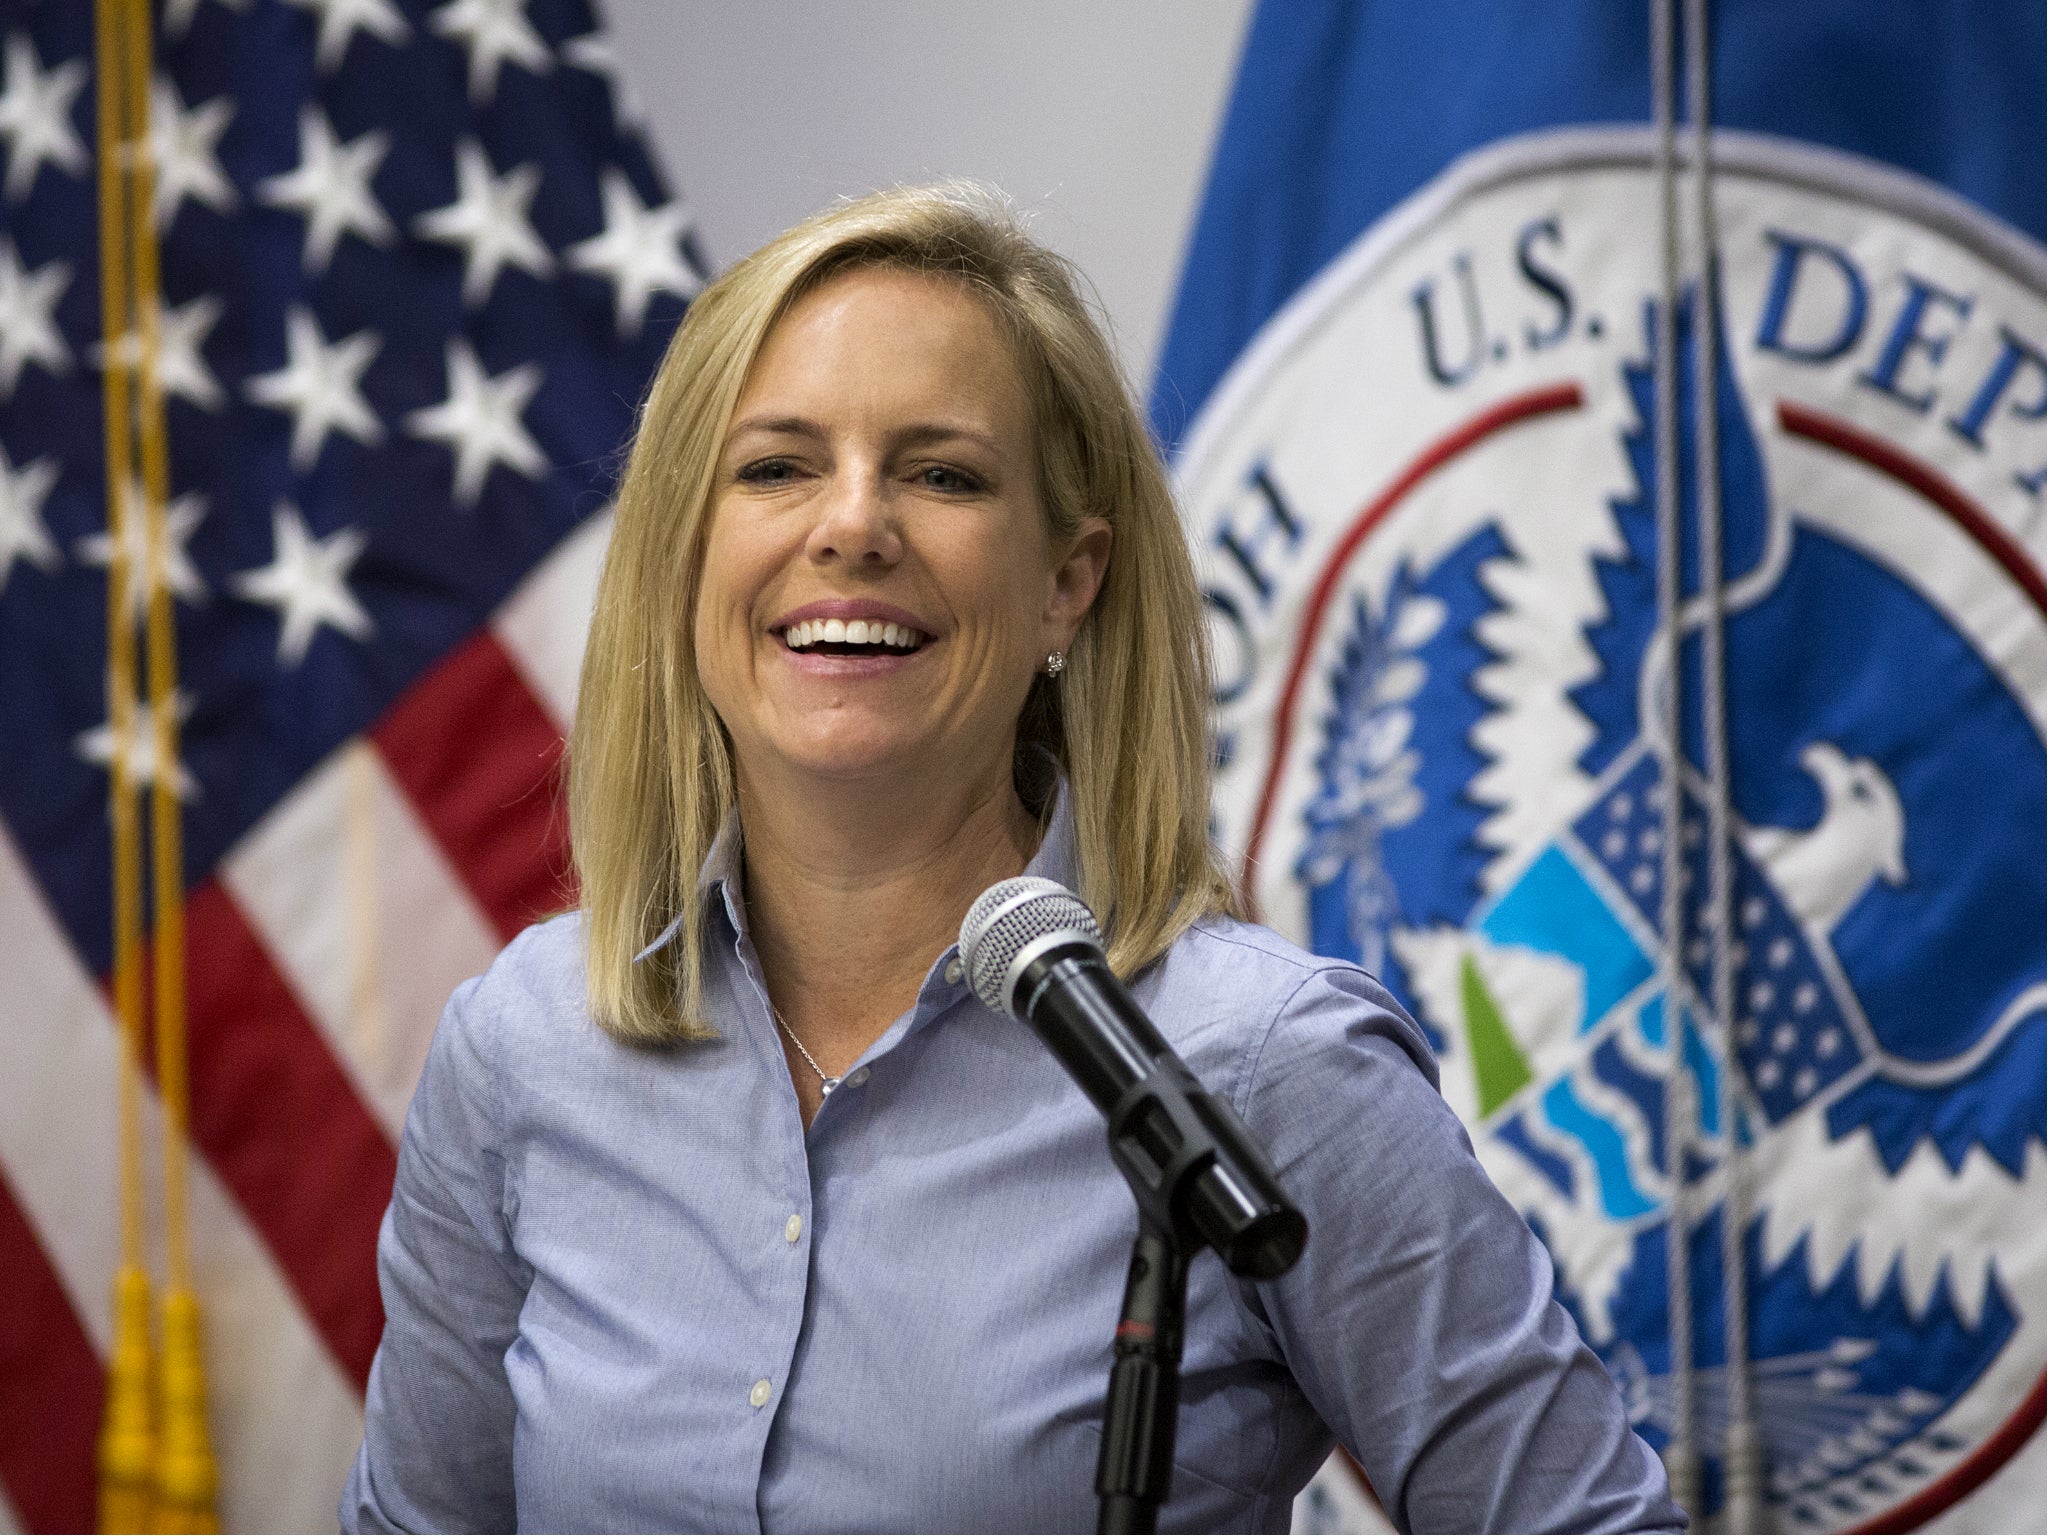 Kirstjen Nielsen leads the US Department of Homeland Security and a think tank has called for greater transparency in homeland security and counterterrorism spending.